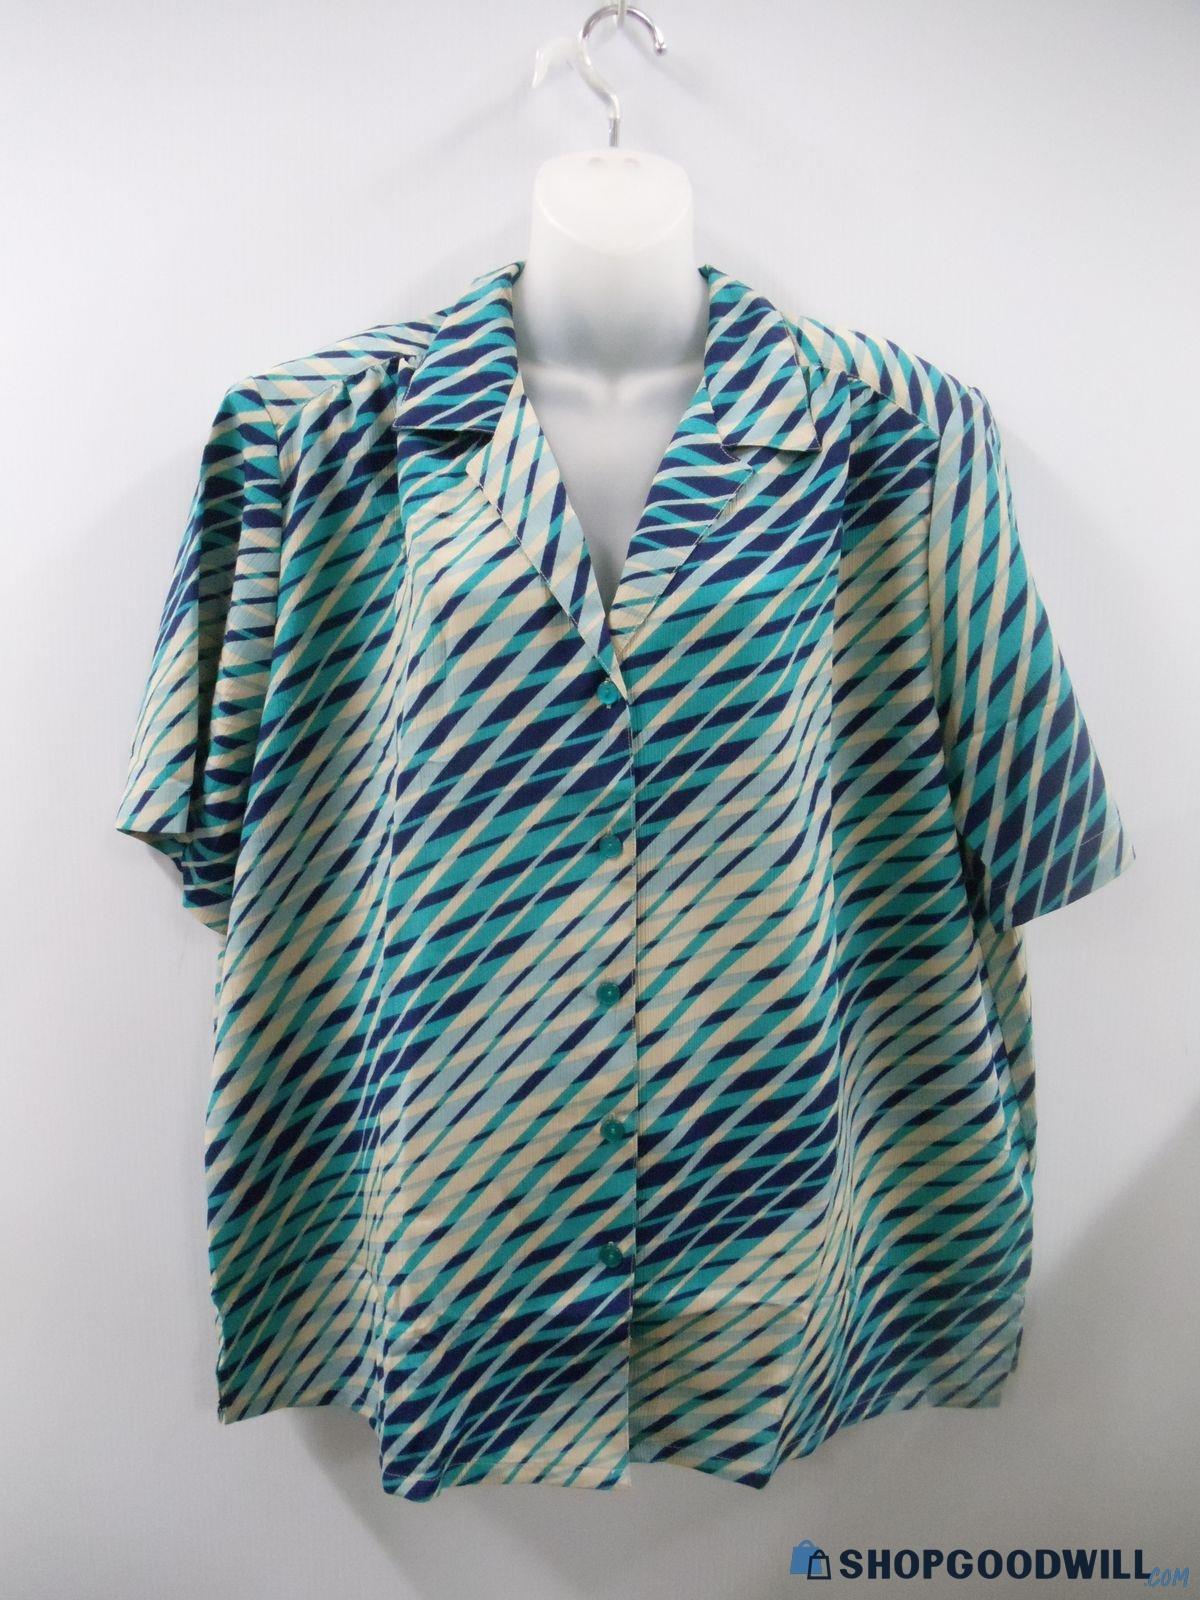 NWT Women's 2X Plus Size SS Donnkenny Classics Blue Blouse Top ...